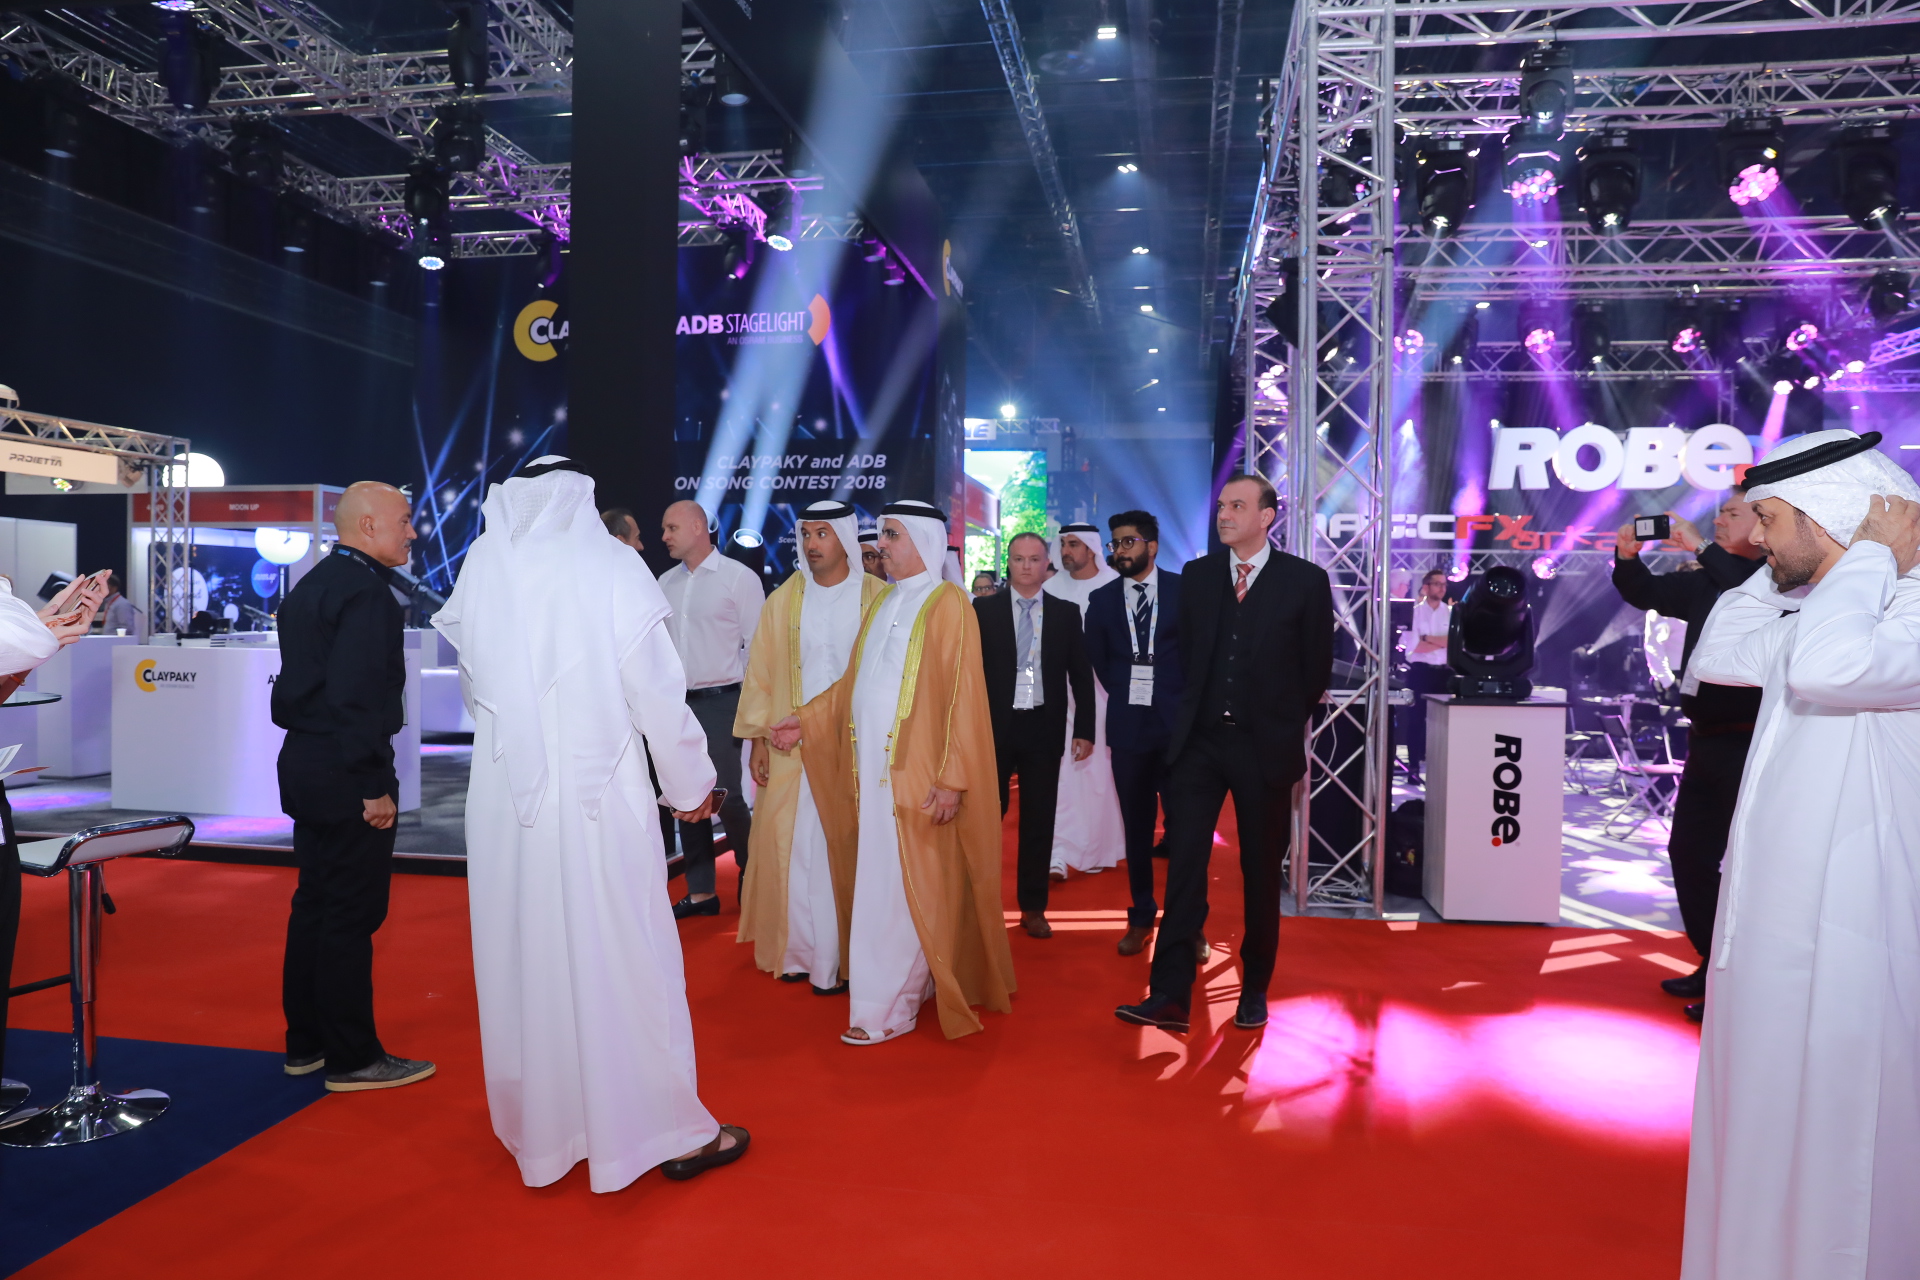 Prolight + Sound Middle East - PLSME 2018 was opened by H.E. Saeed Mohammed Ahmed Al Tayer